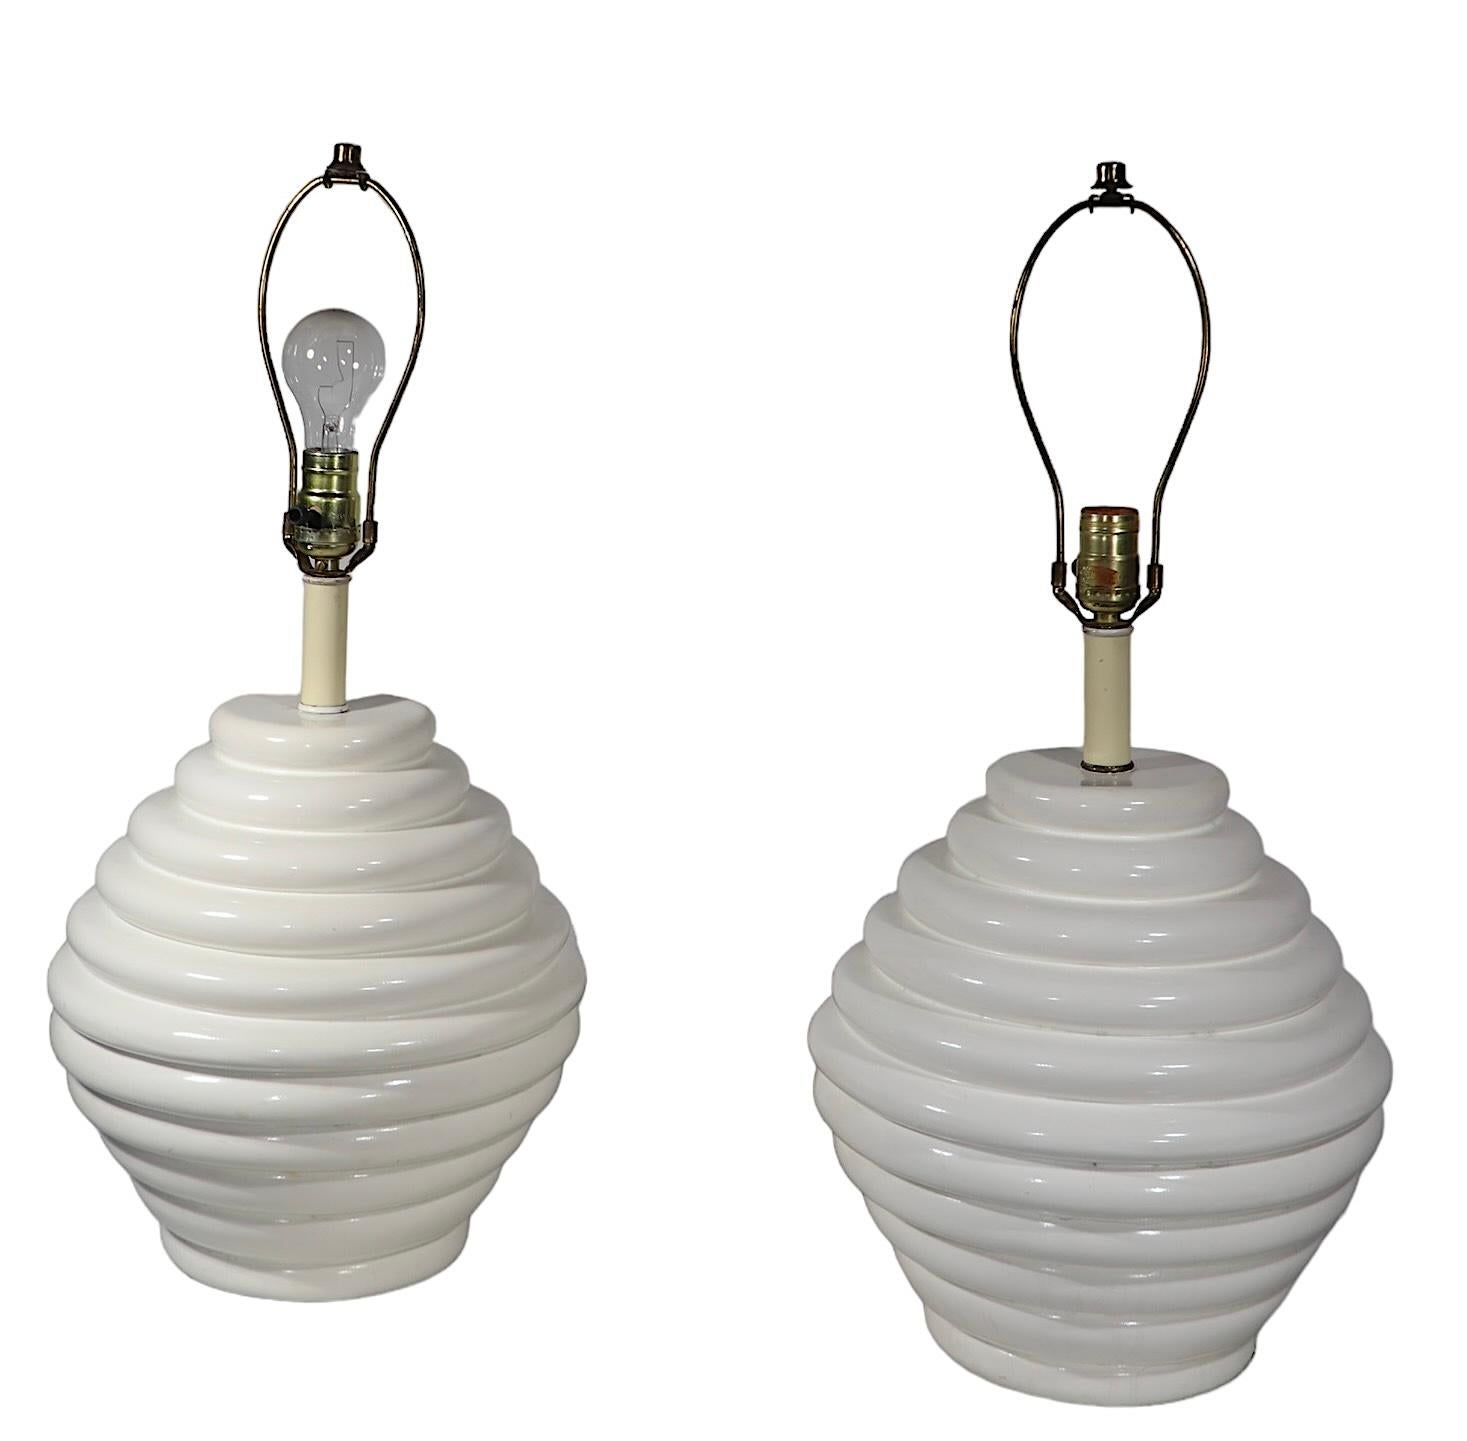 American Pr. Mid Century Space Age Bulbous Form Table Lamps in White Finish c. 1950/70's For Sale